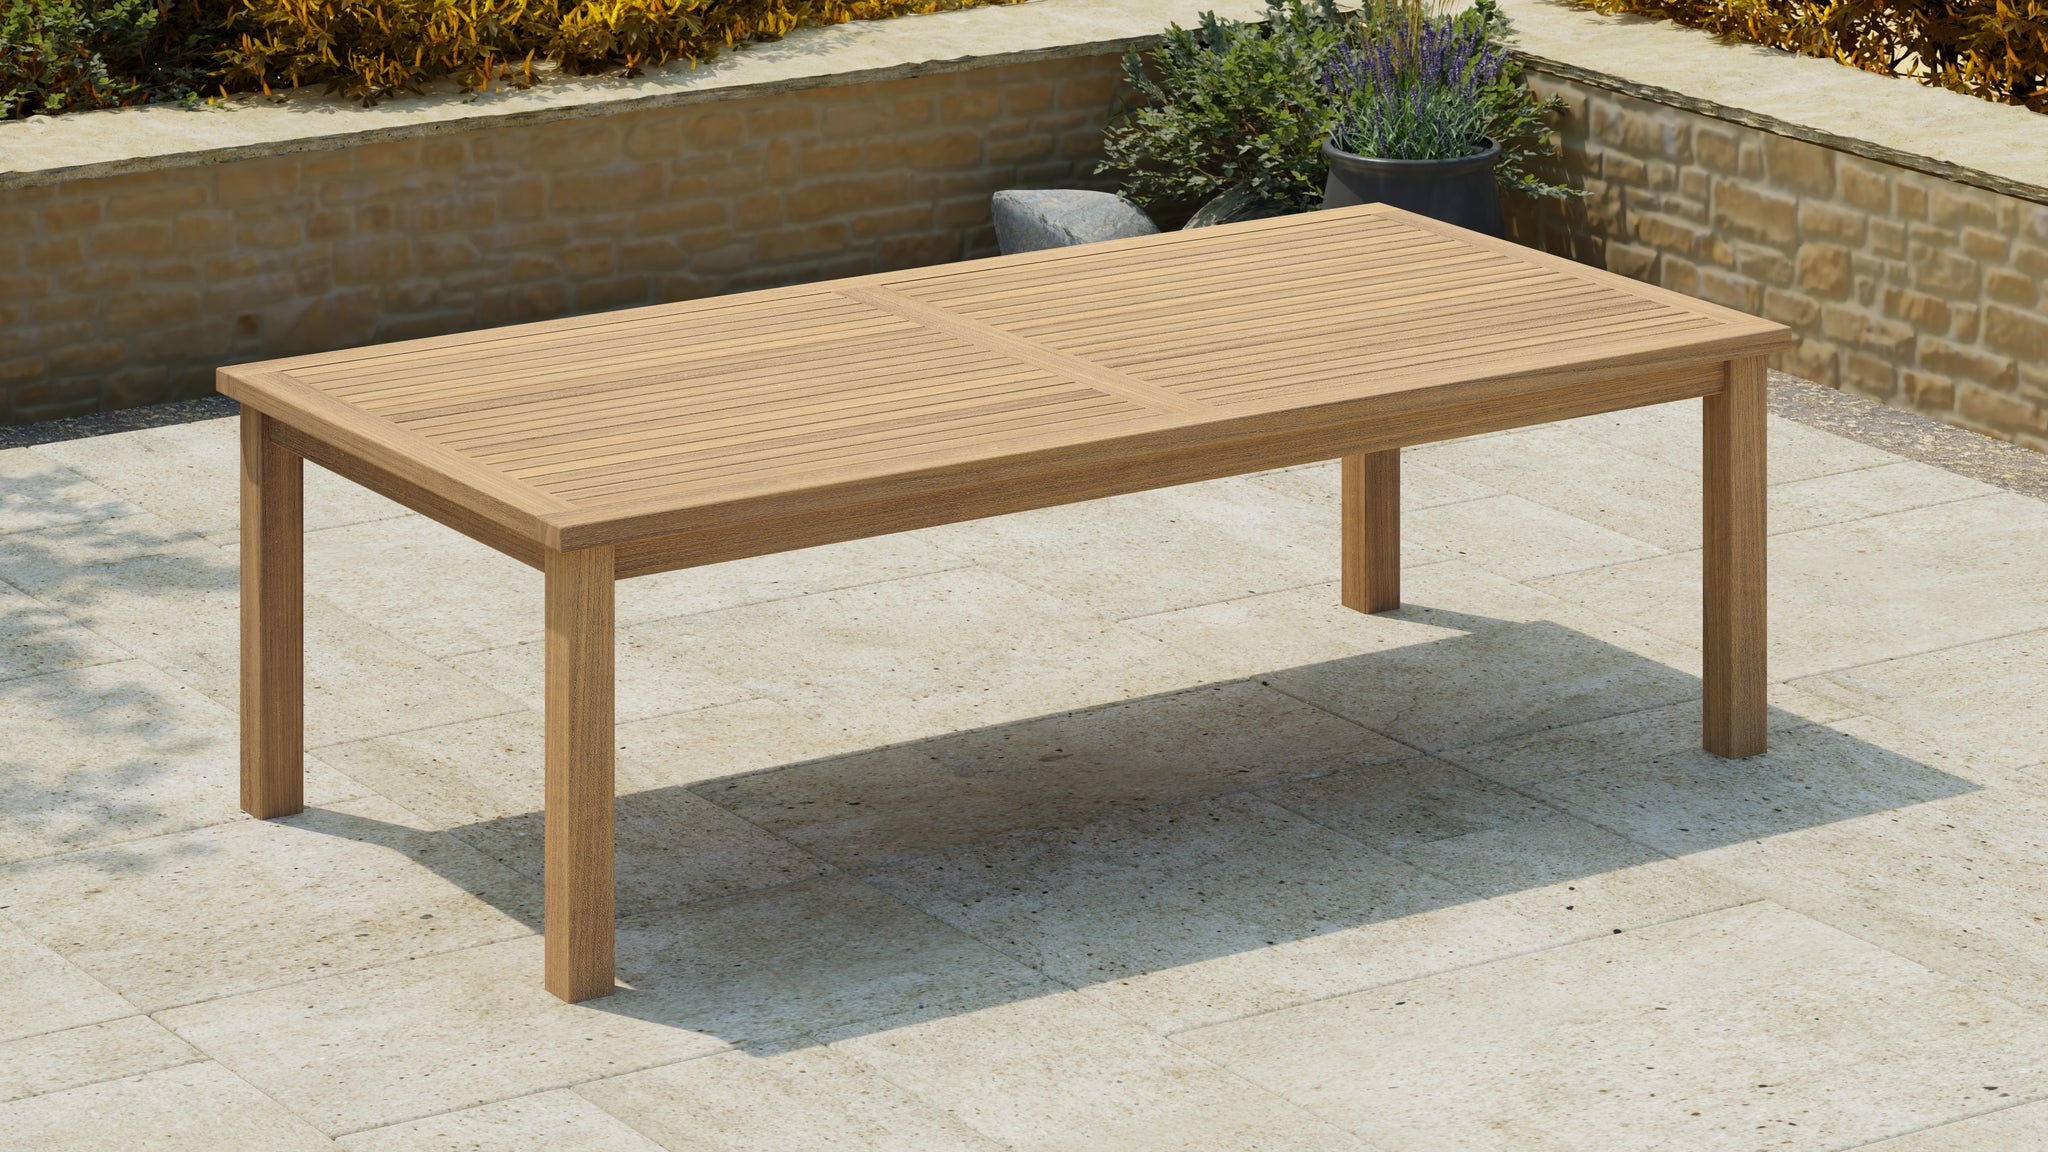 120x240cm Fixed Rectangular Table without Parasol Hole